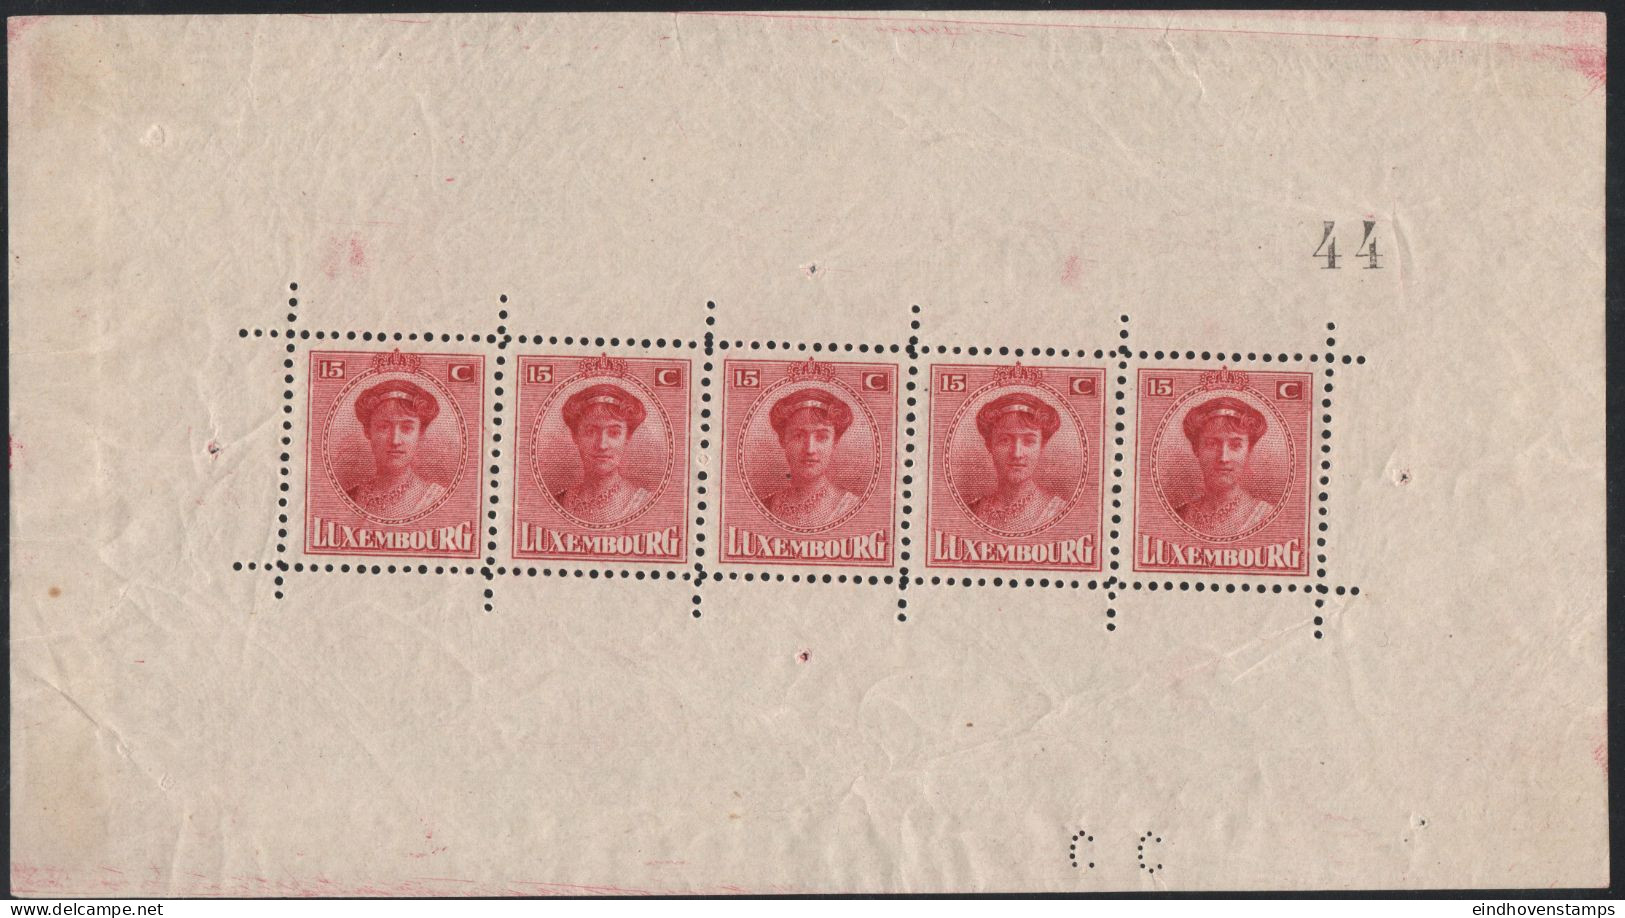 Luxemburg 1921 Minisheet Of 5 Stamps Charlotte MNH Left Side Ungommed, Some Usual Wrinkles Outside The Stamps - 1921-27 Charlotte Front Side